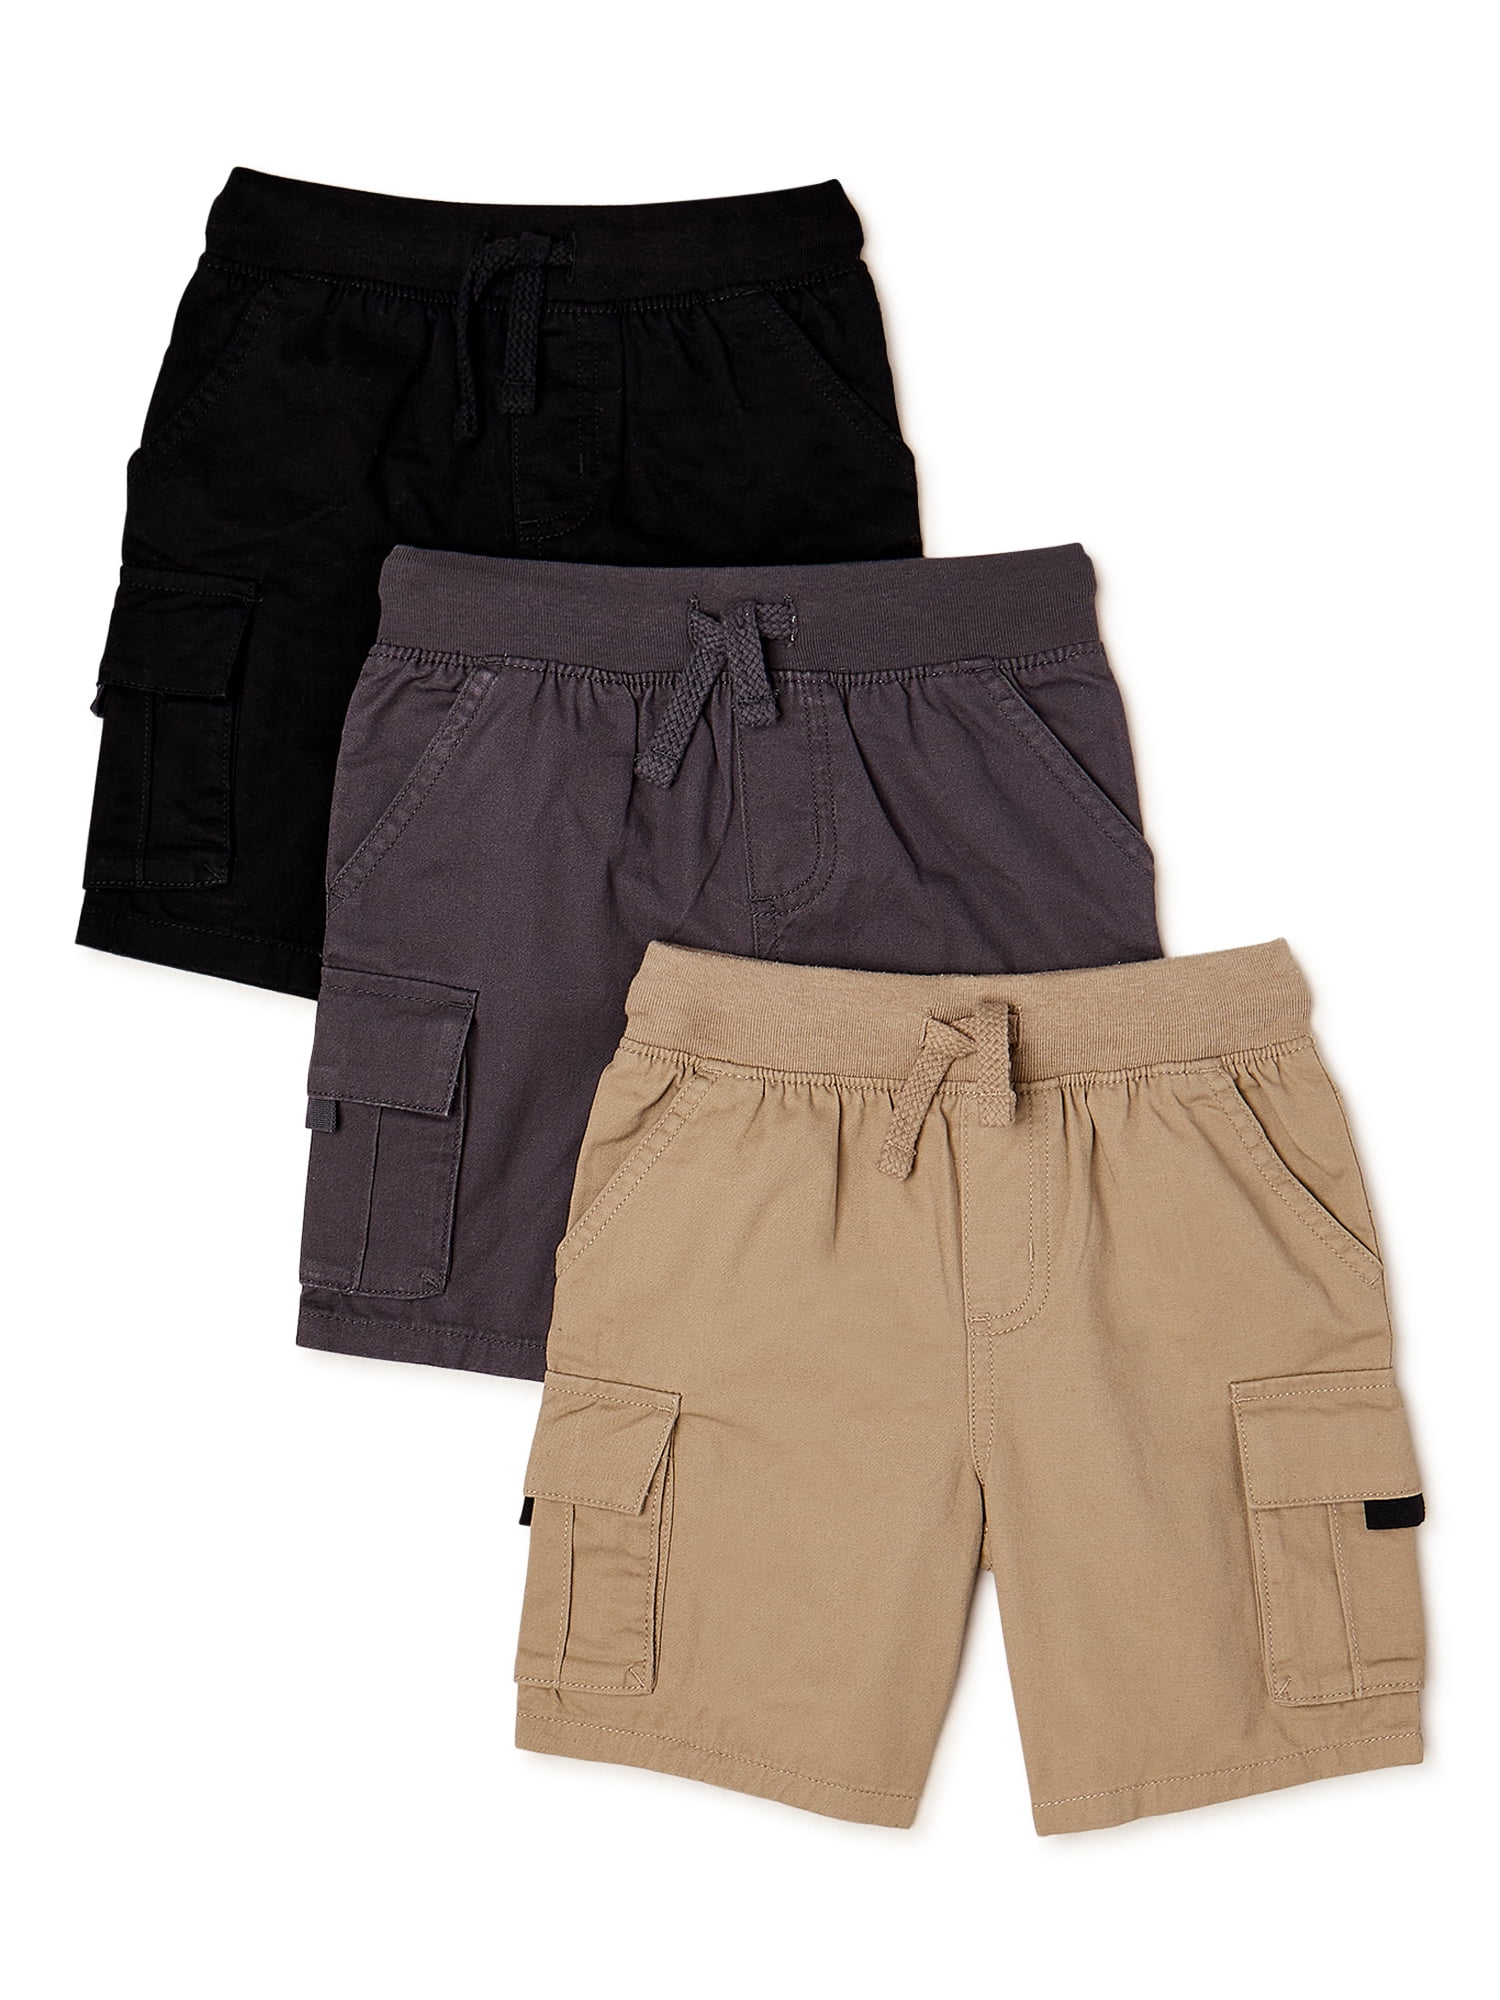 or LOT OF Garanimals Boy's Shorts You CHOOSE YOUR LOT QTY's of 5 2 3 , 